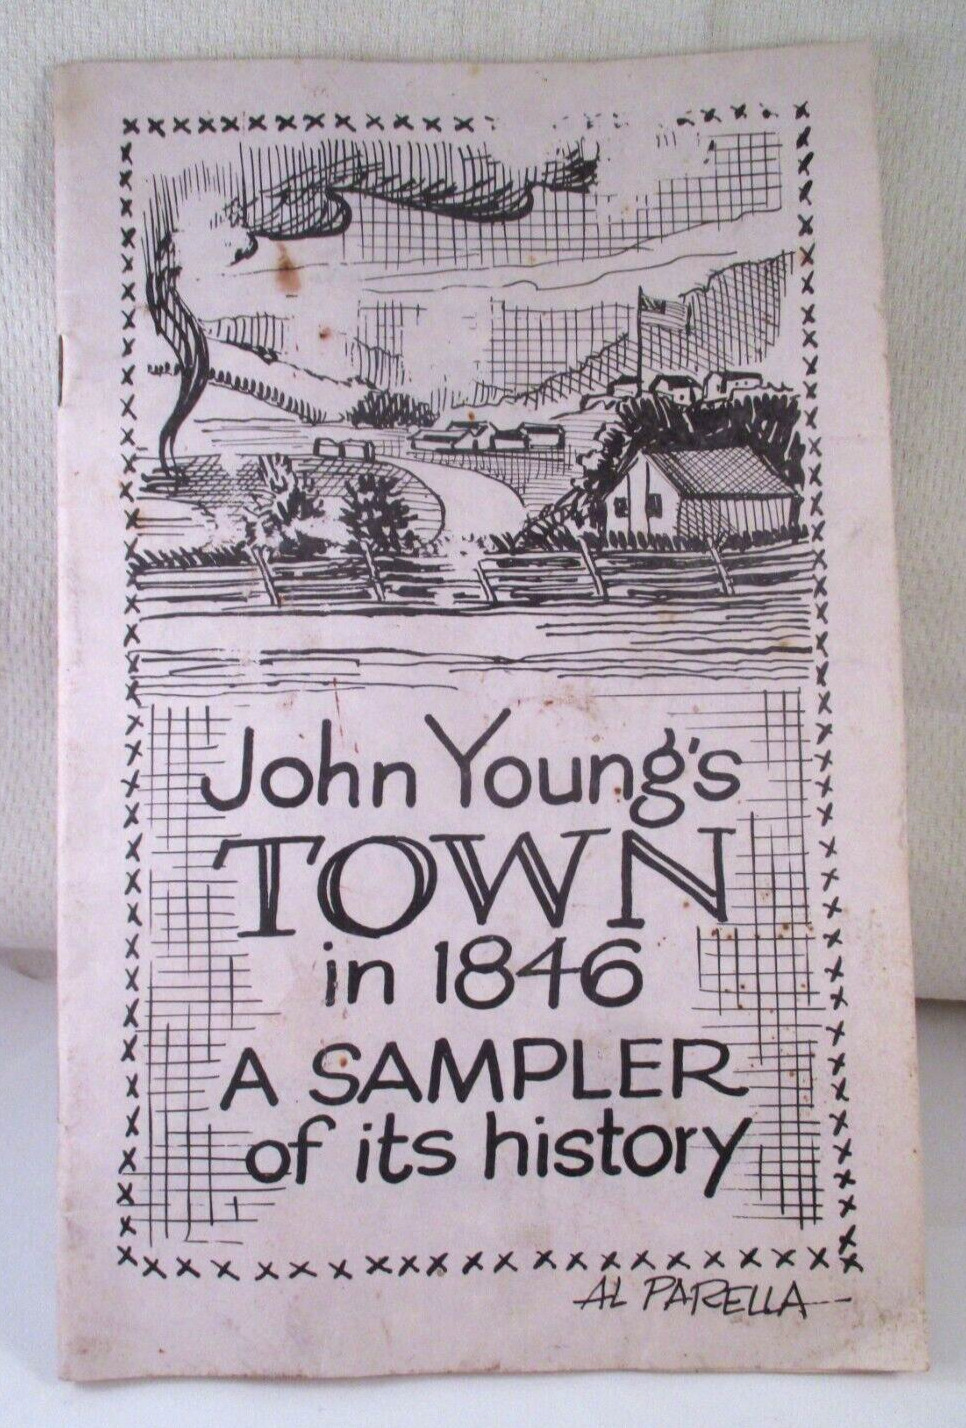 Vtg JOHN YOUNG\'S TOWN in 1846 A SAMPLER HISTORY YOUNGSTOWN OH AL PARELLA COVER